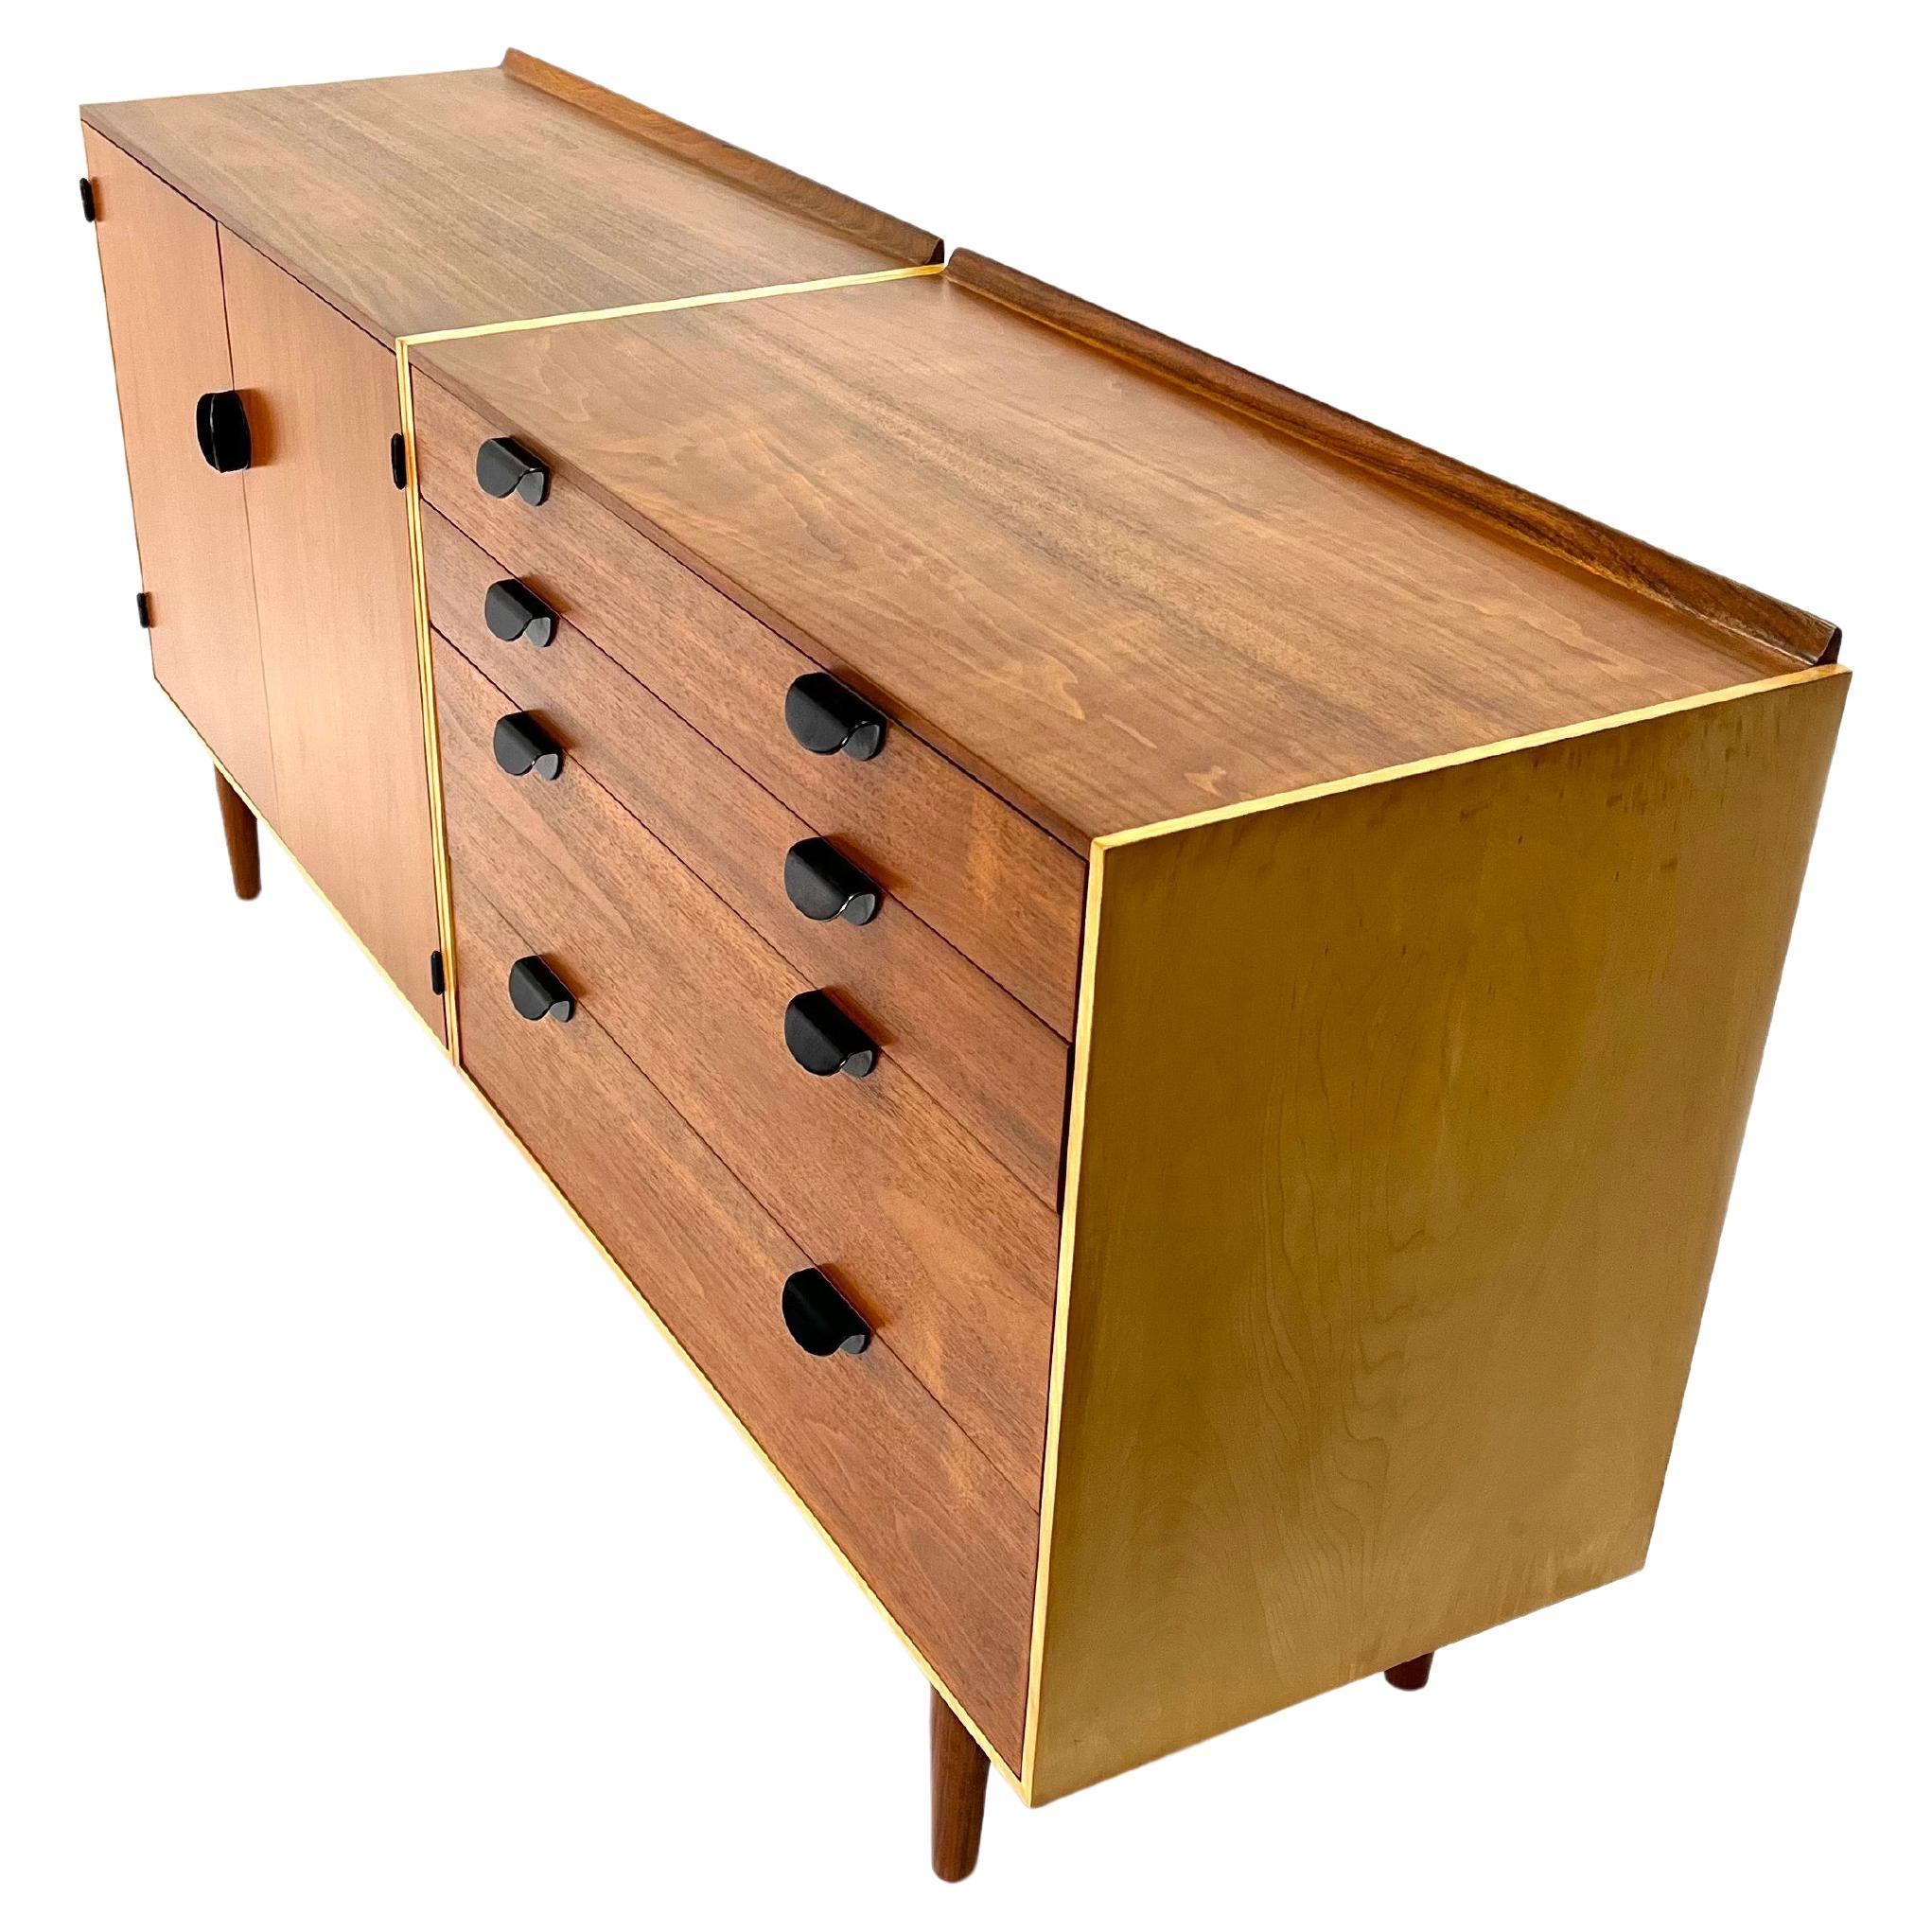 This incredible teak and maple credenza is designed by Finn Juhl and is fully restored. This is an incredible example of his work. The teak case is topped with a raised back-rail, four stacked drawers with black enamel brass pulls raised on tapered